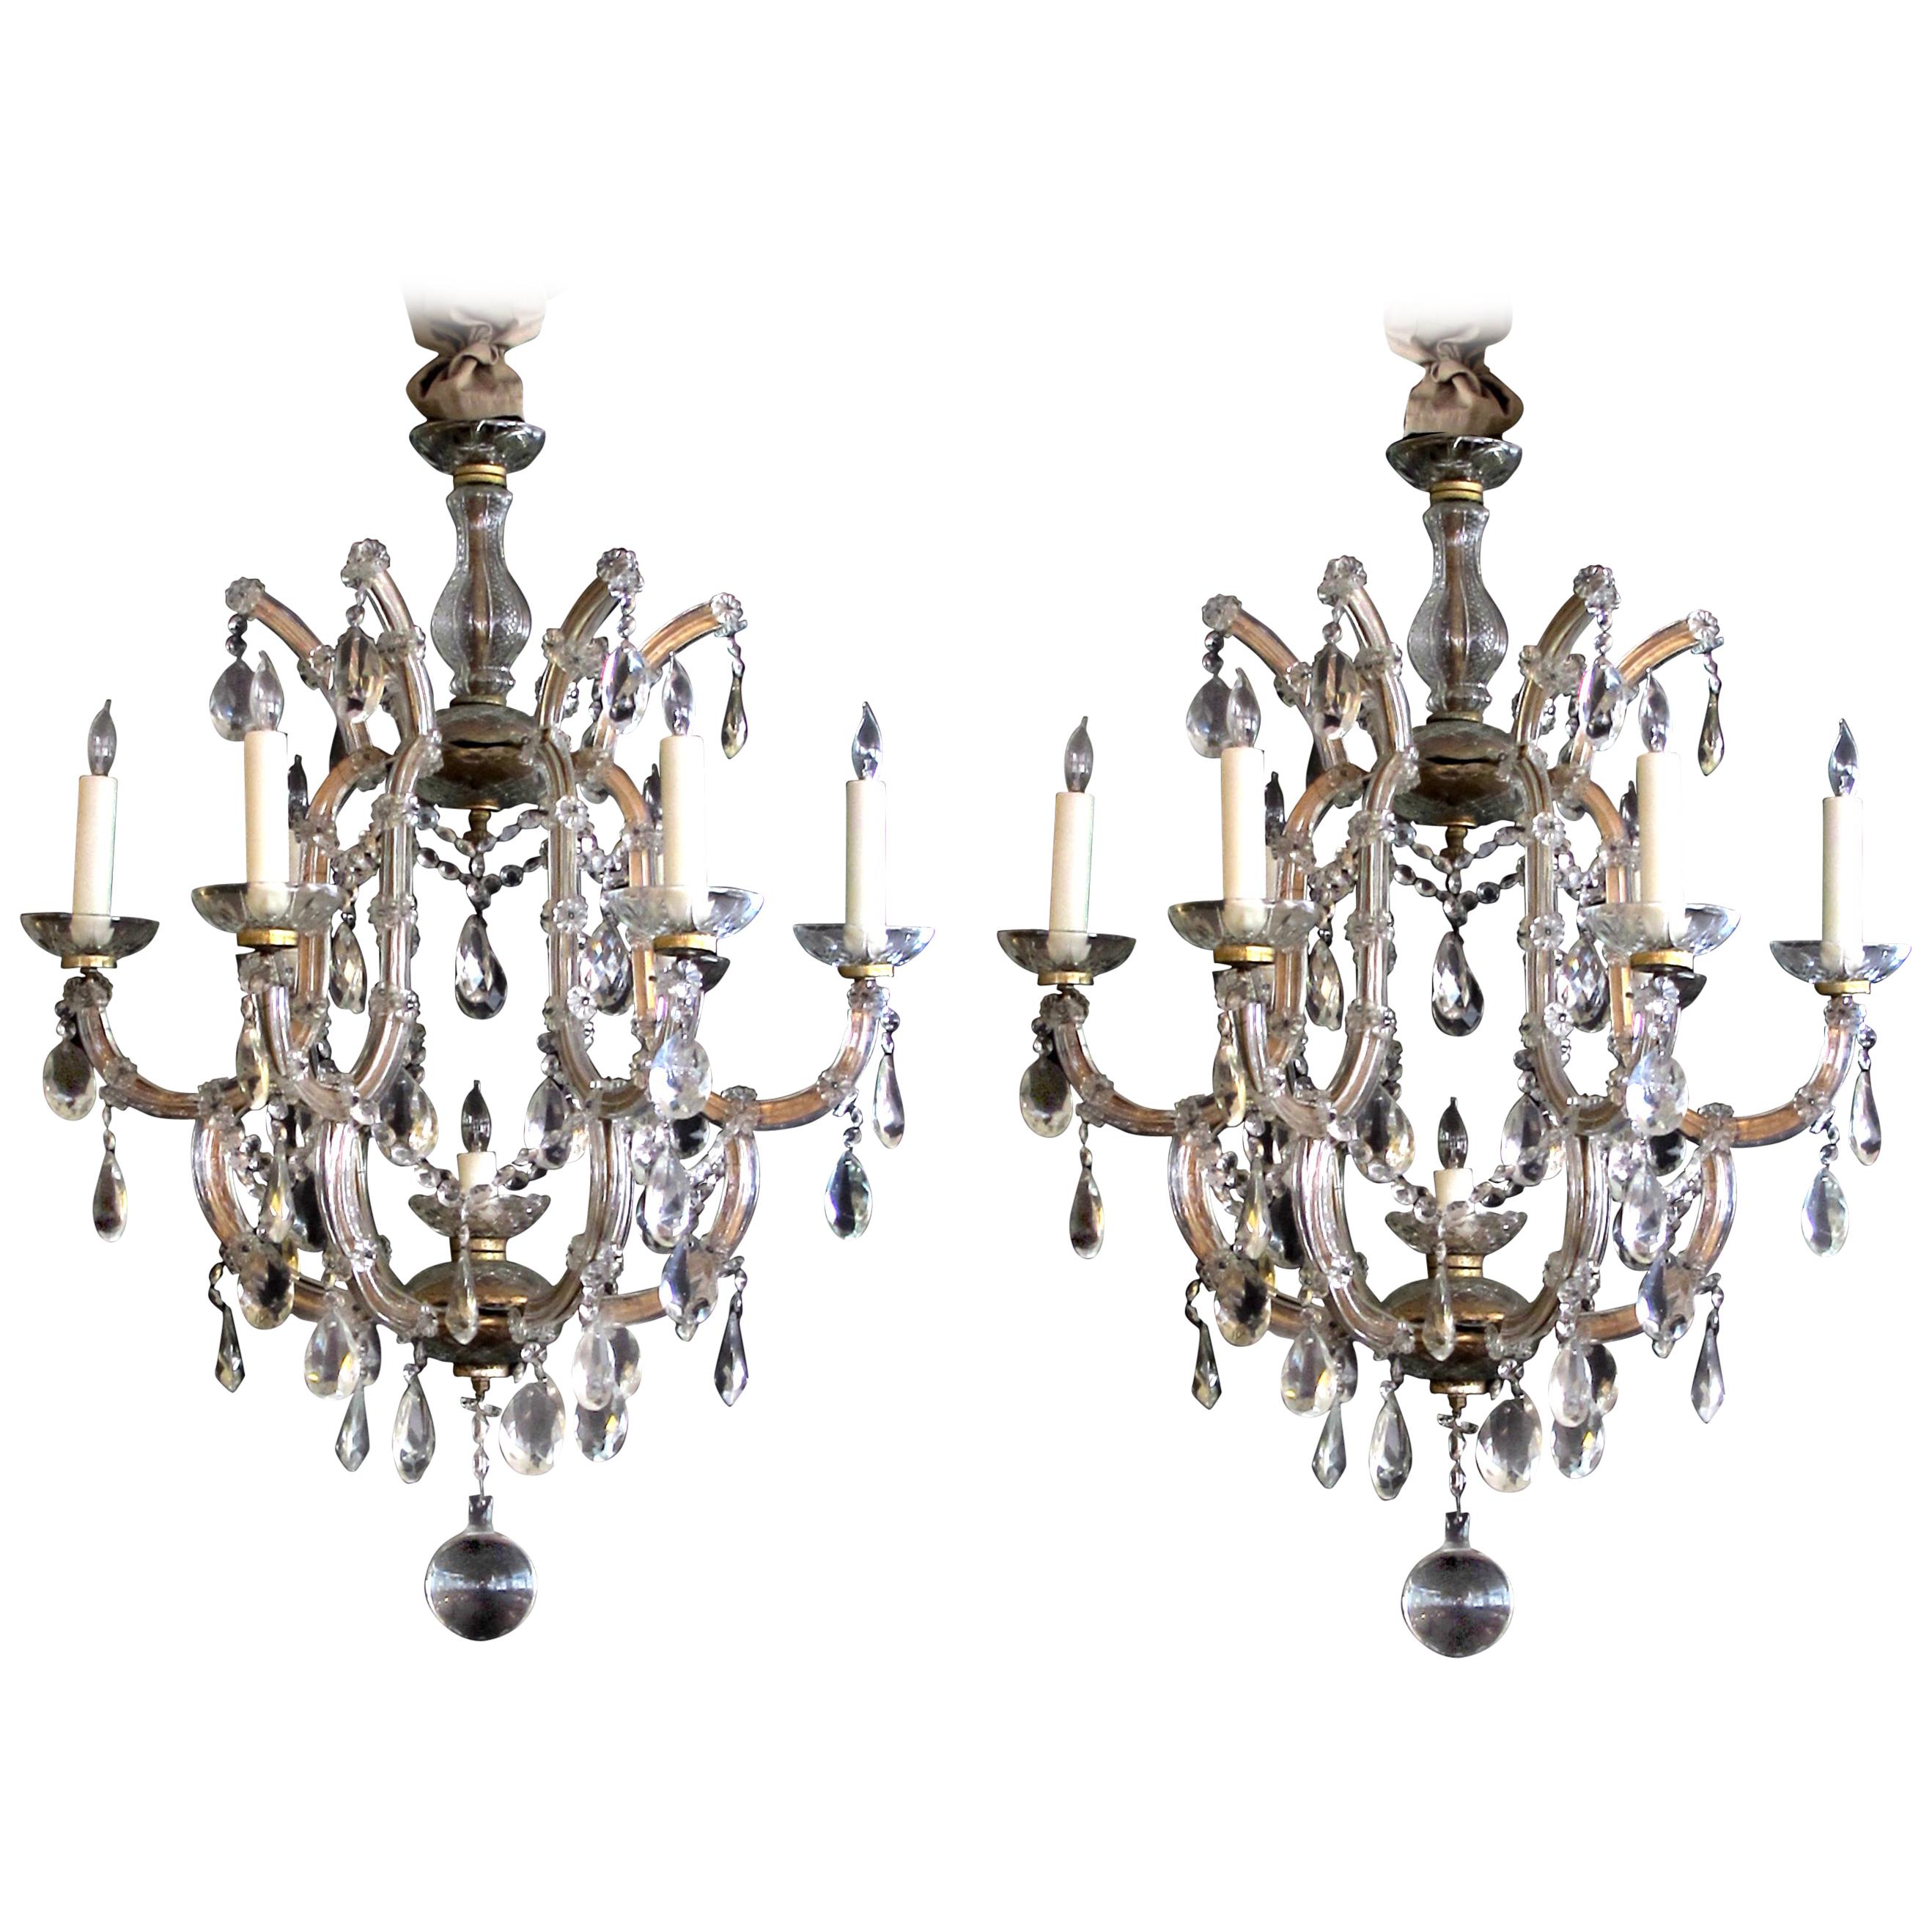 Good Pair of Continental Maria Theresa Basket-Form Glass & Crystal Chandeliers For Sale